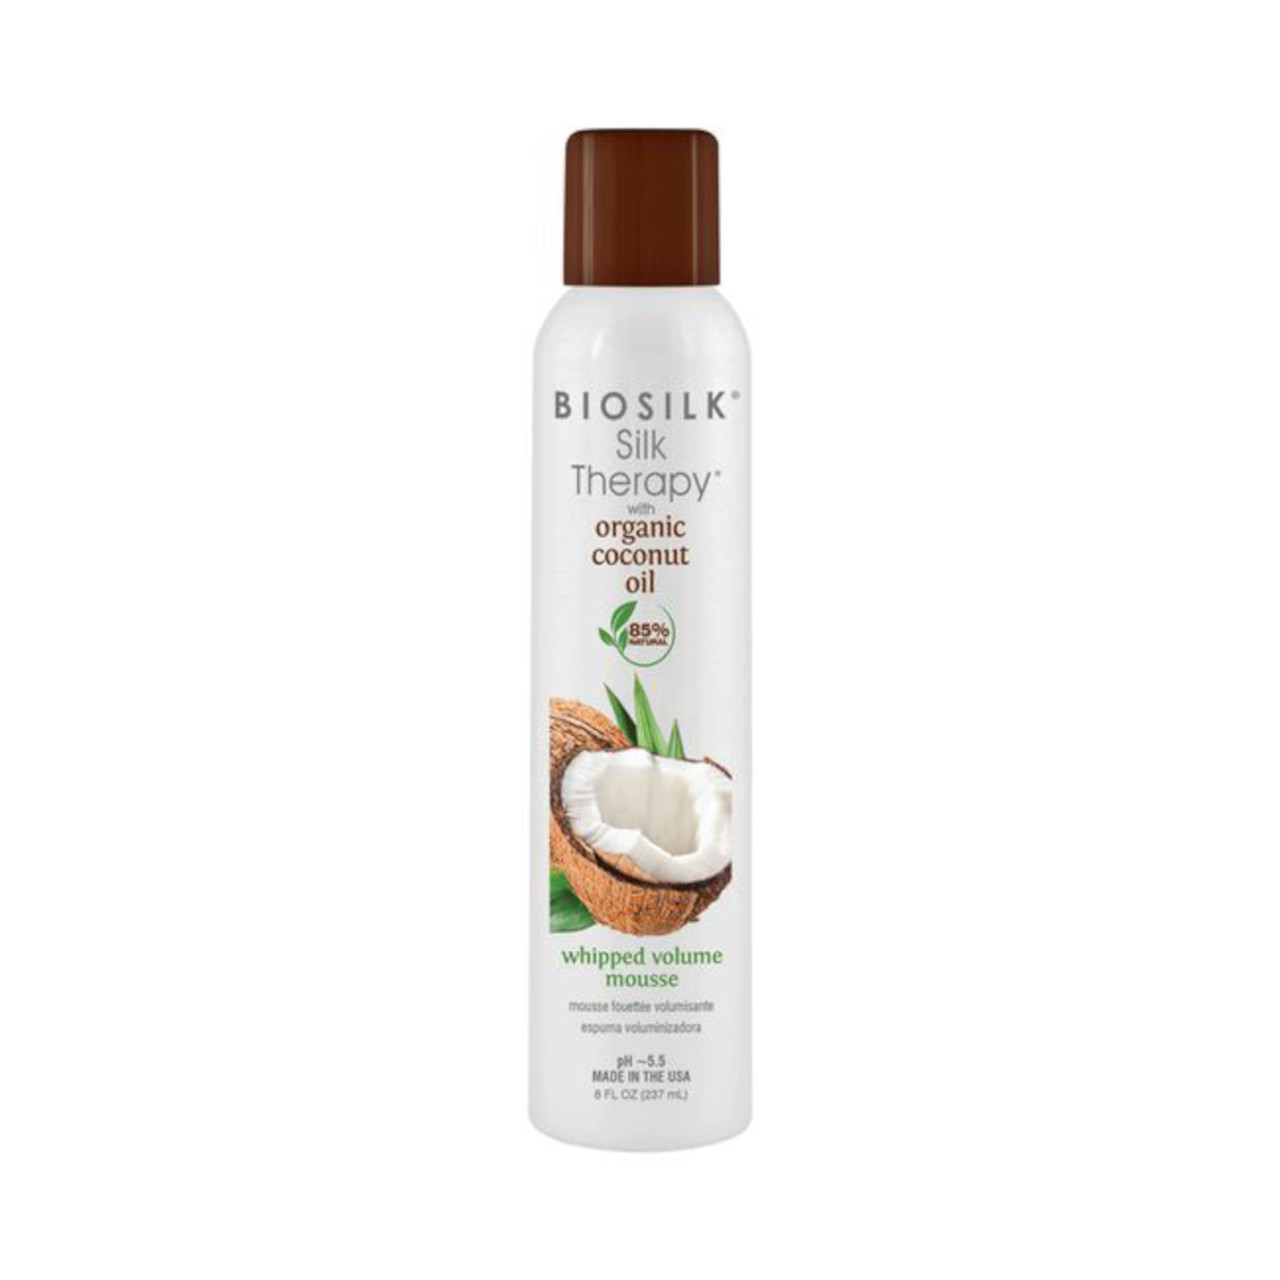 BioSilk Silk Therapy with Coconut Oil Whipped Volume Mousse